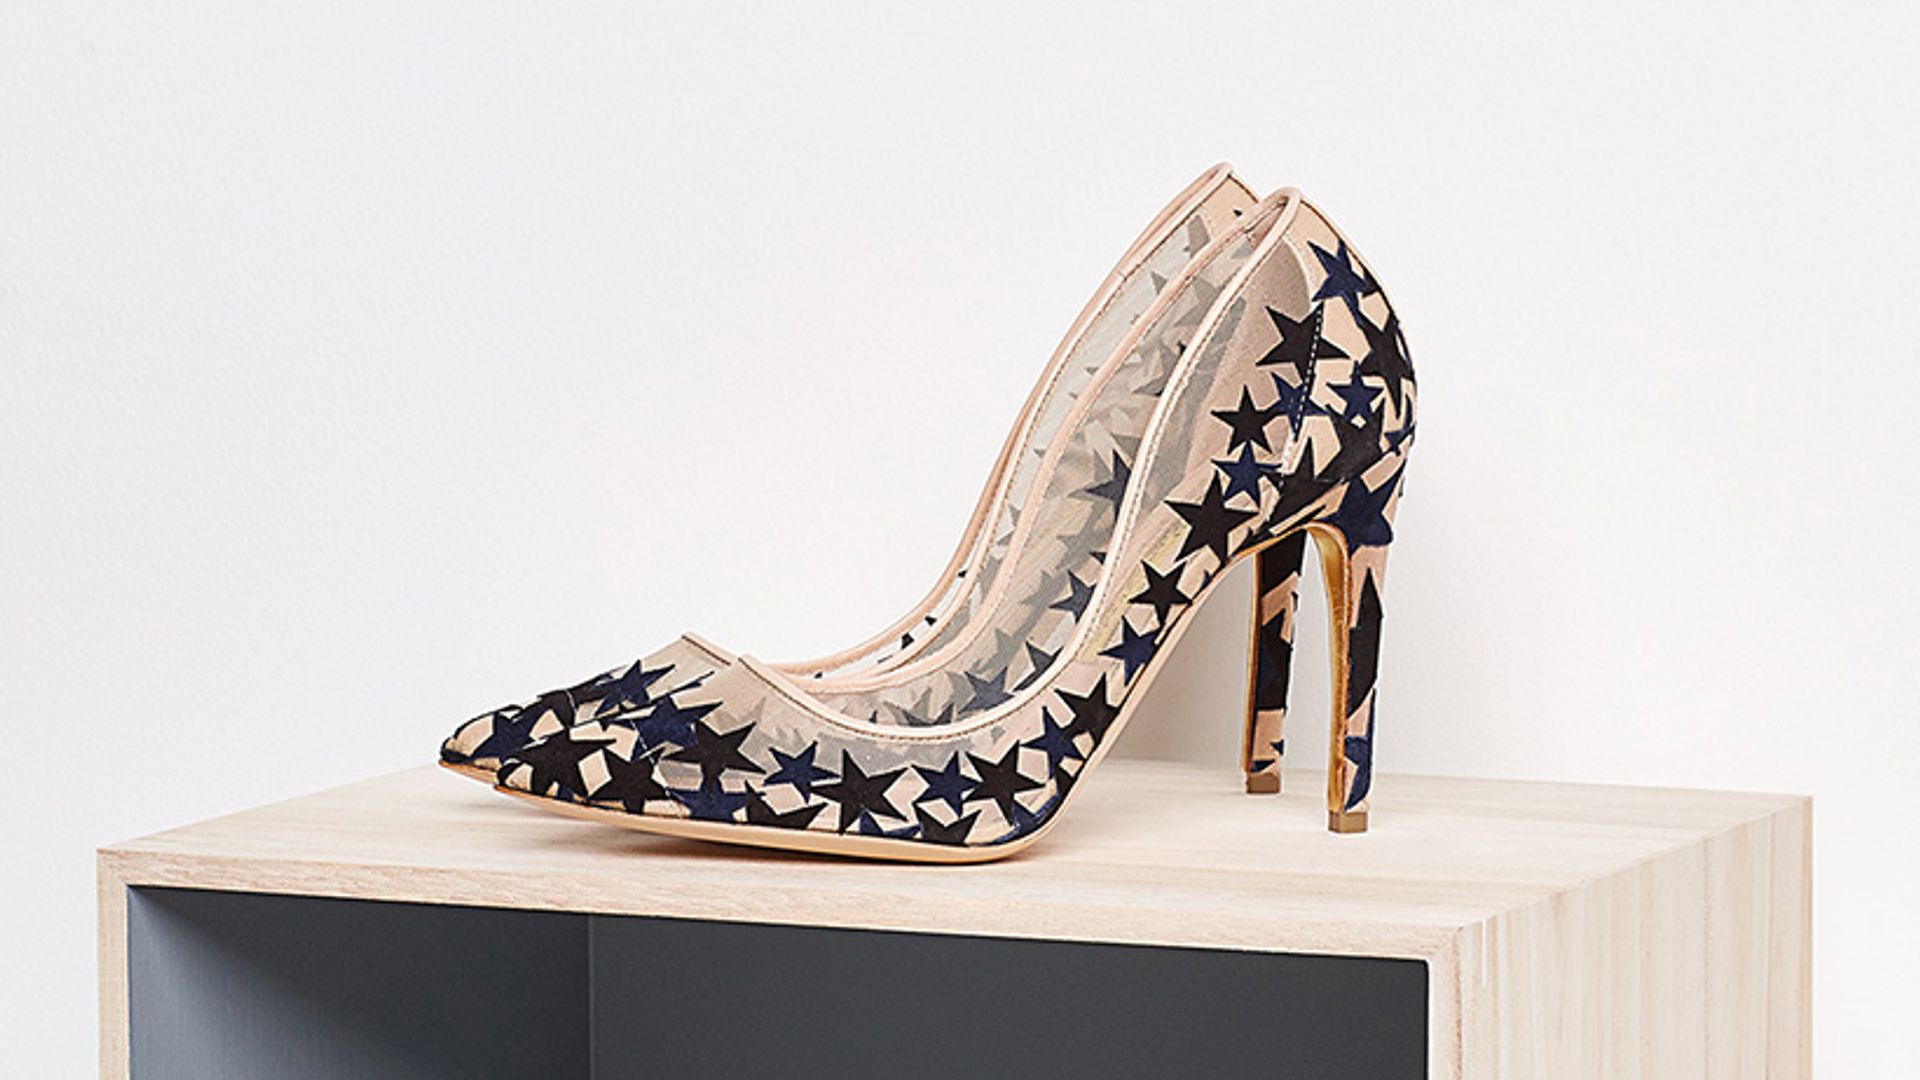 HFM's Tuesday Shoesday! Twilight heels by Rupert Sanderson